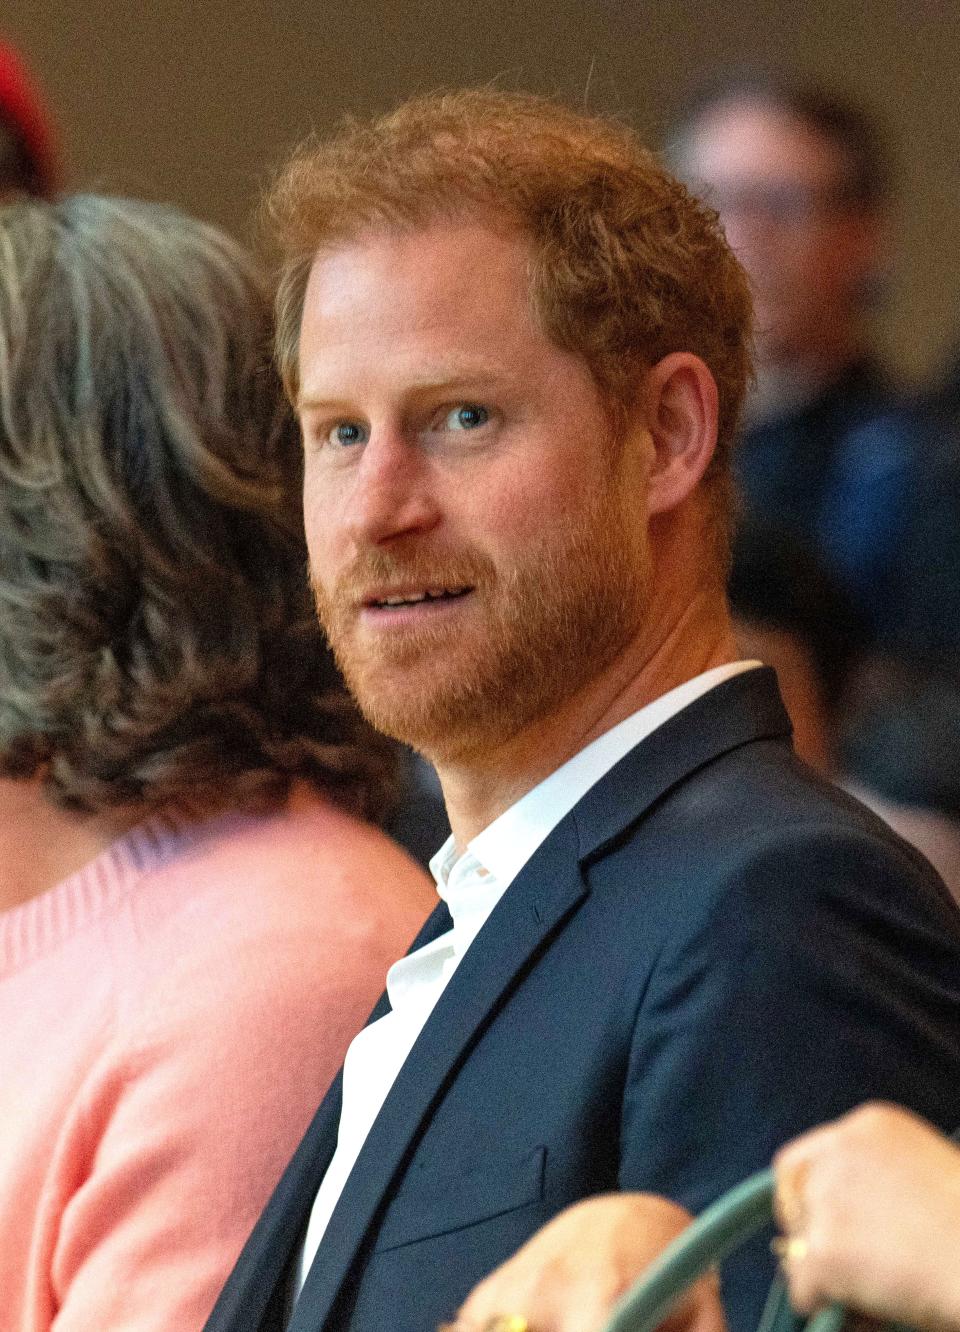 Prince Harry played the role of supportive husband, sitting in the audience for the panel.